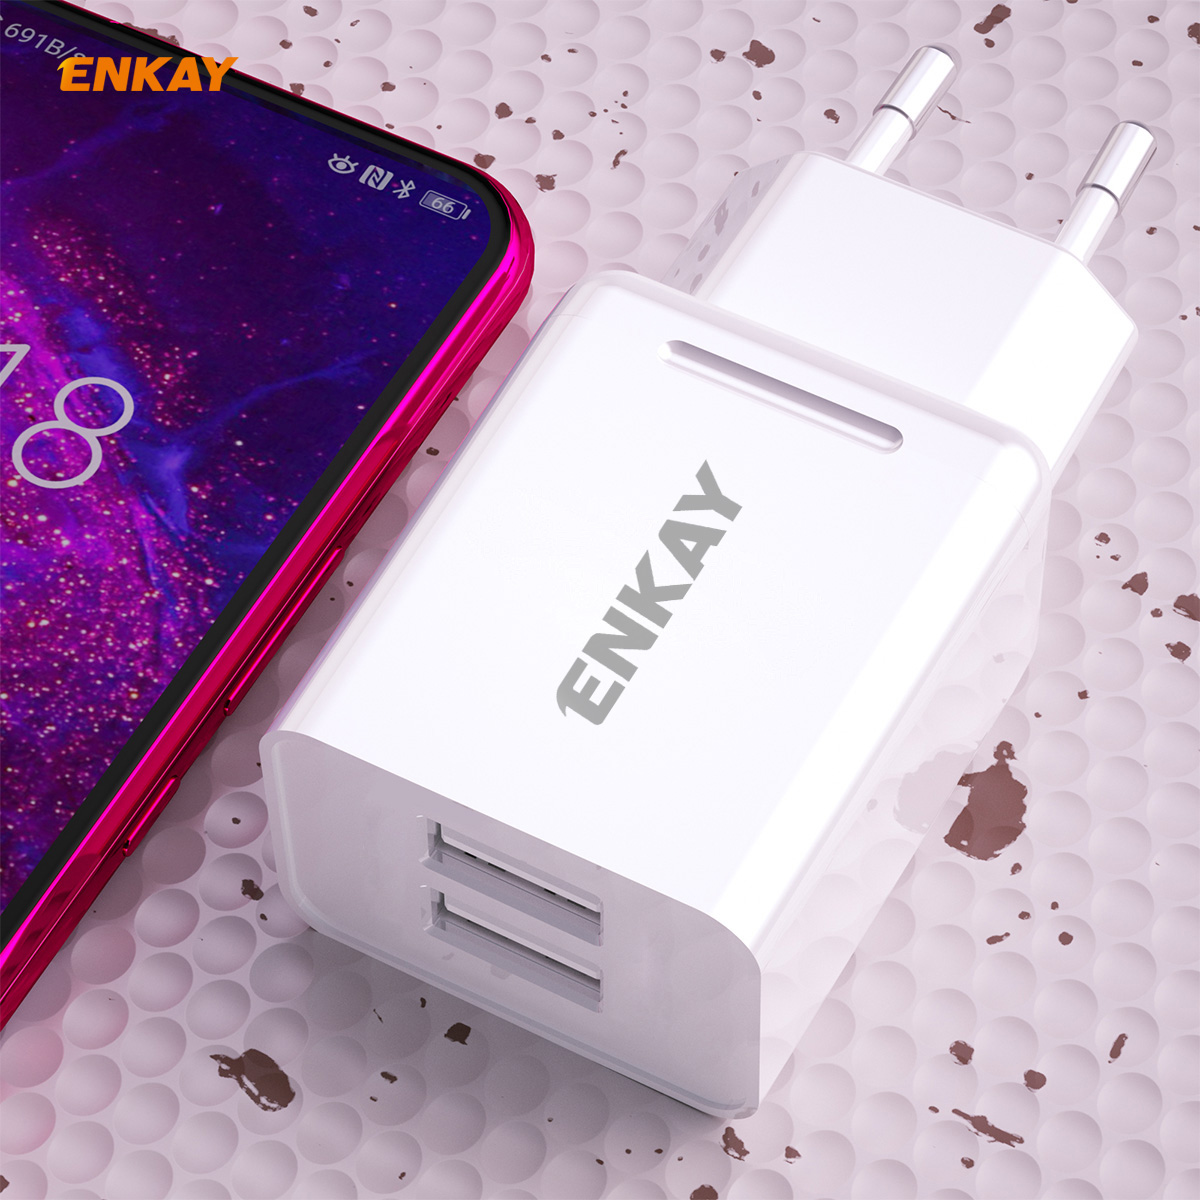 ENKAY-2-USB-Ports-5V-21A-Fast-Charging-USB-Charger-with-Charging-Cable-for-iPhone-12-for-Samsung-Gal-1811128-6